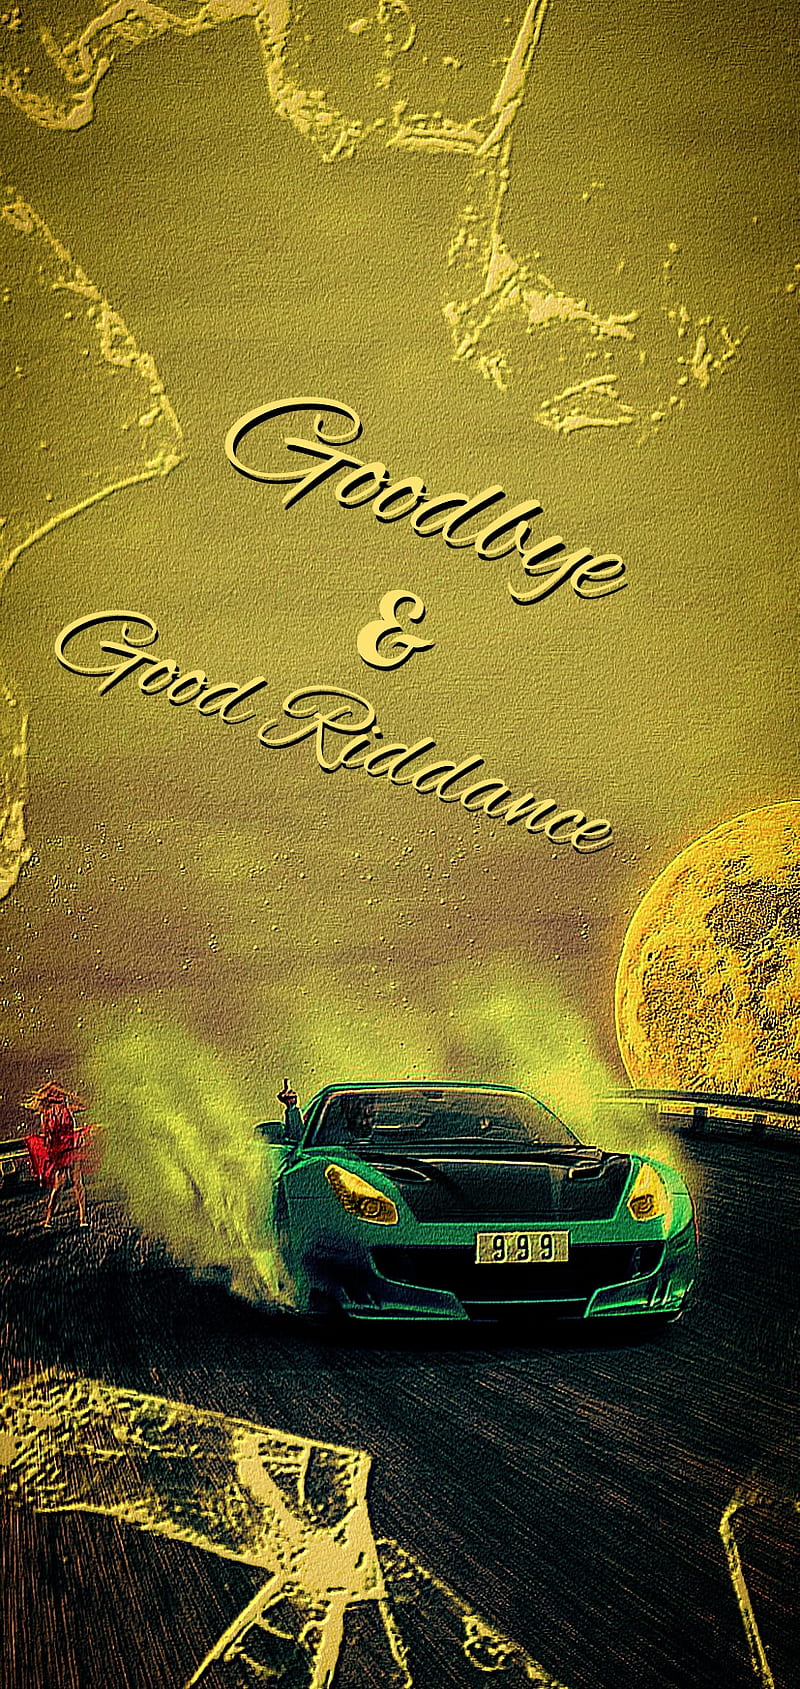 Goodbye and good riddance HD wallpapers  Pxfuel